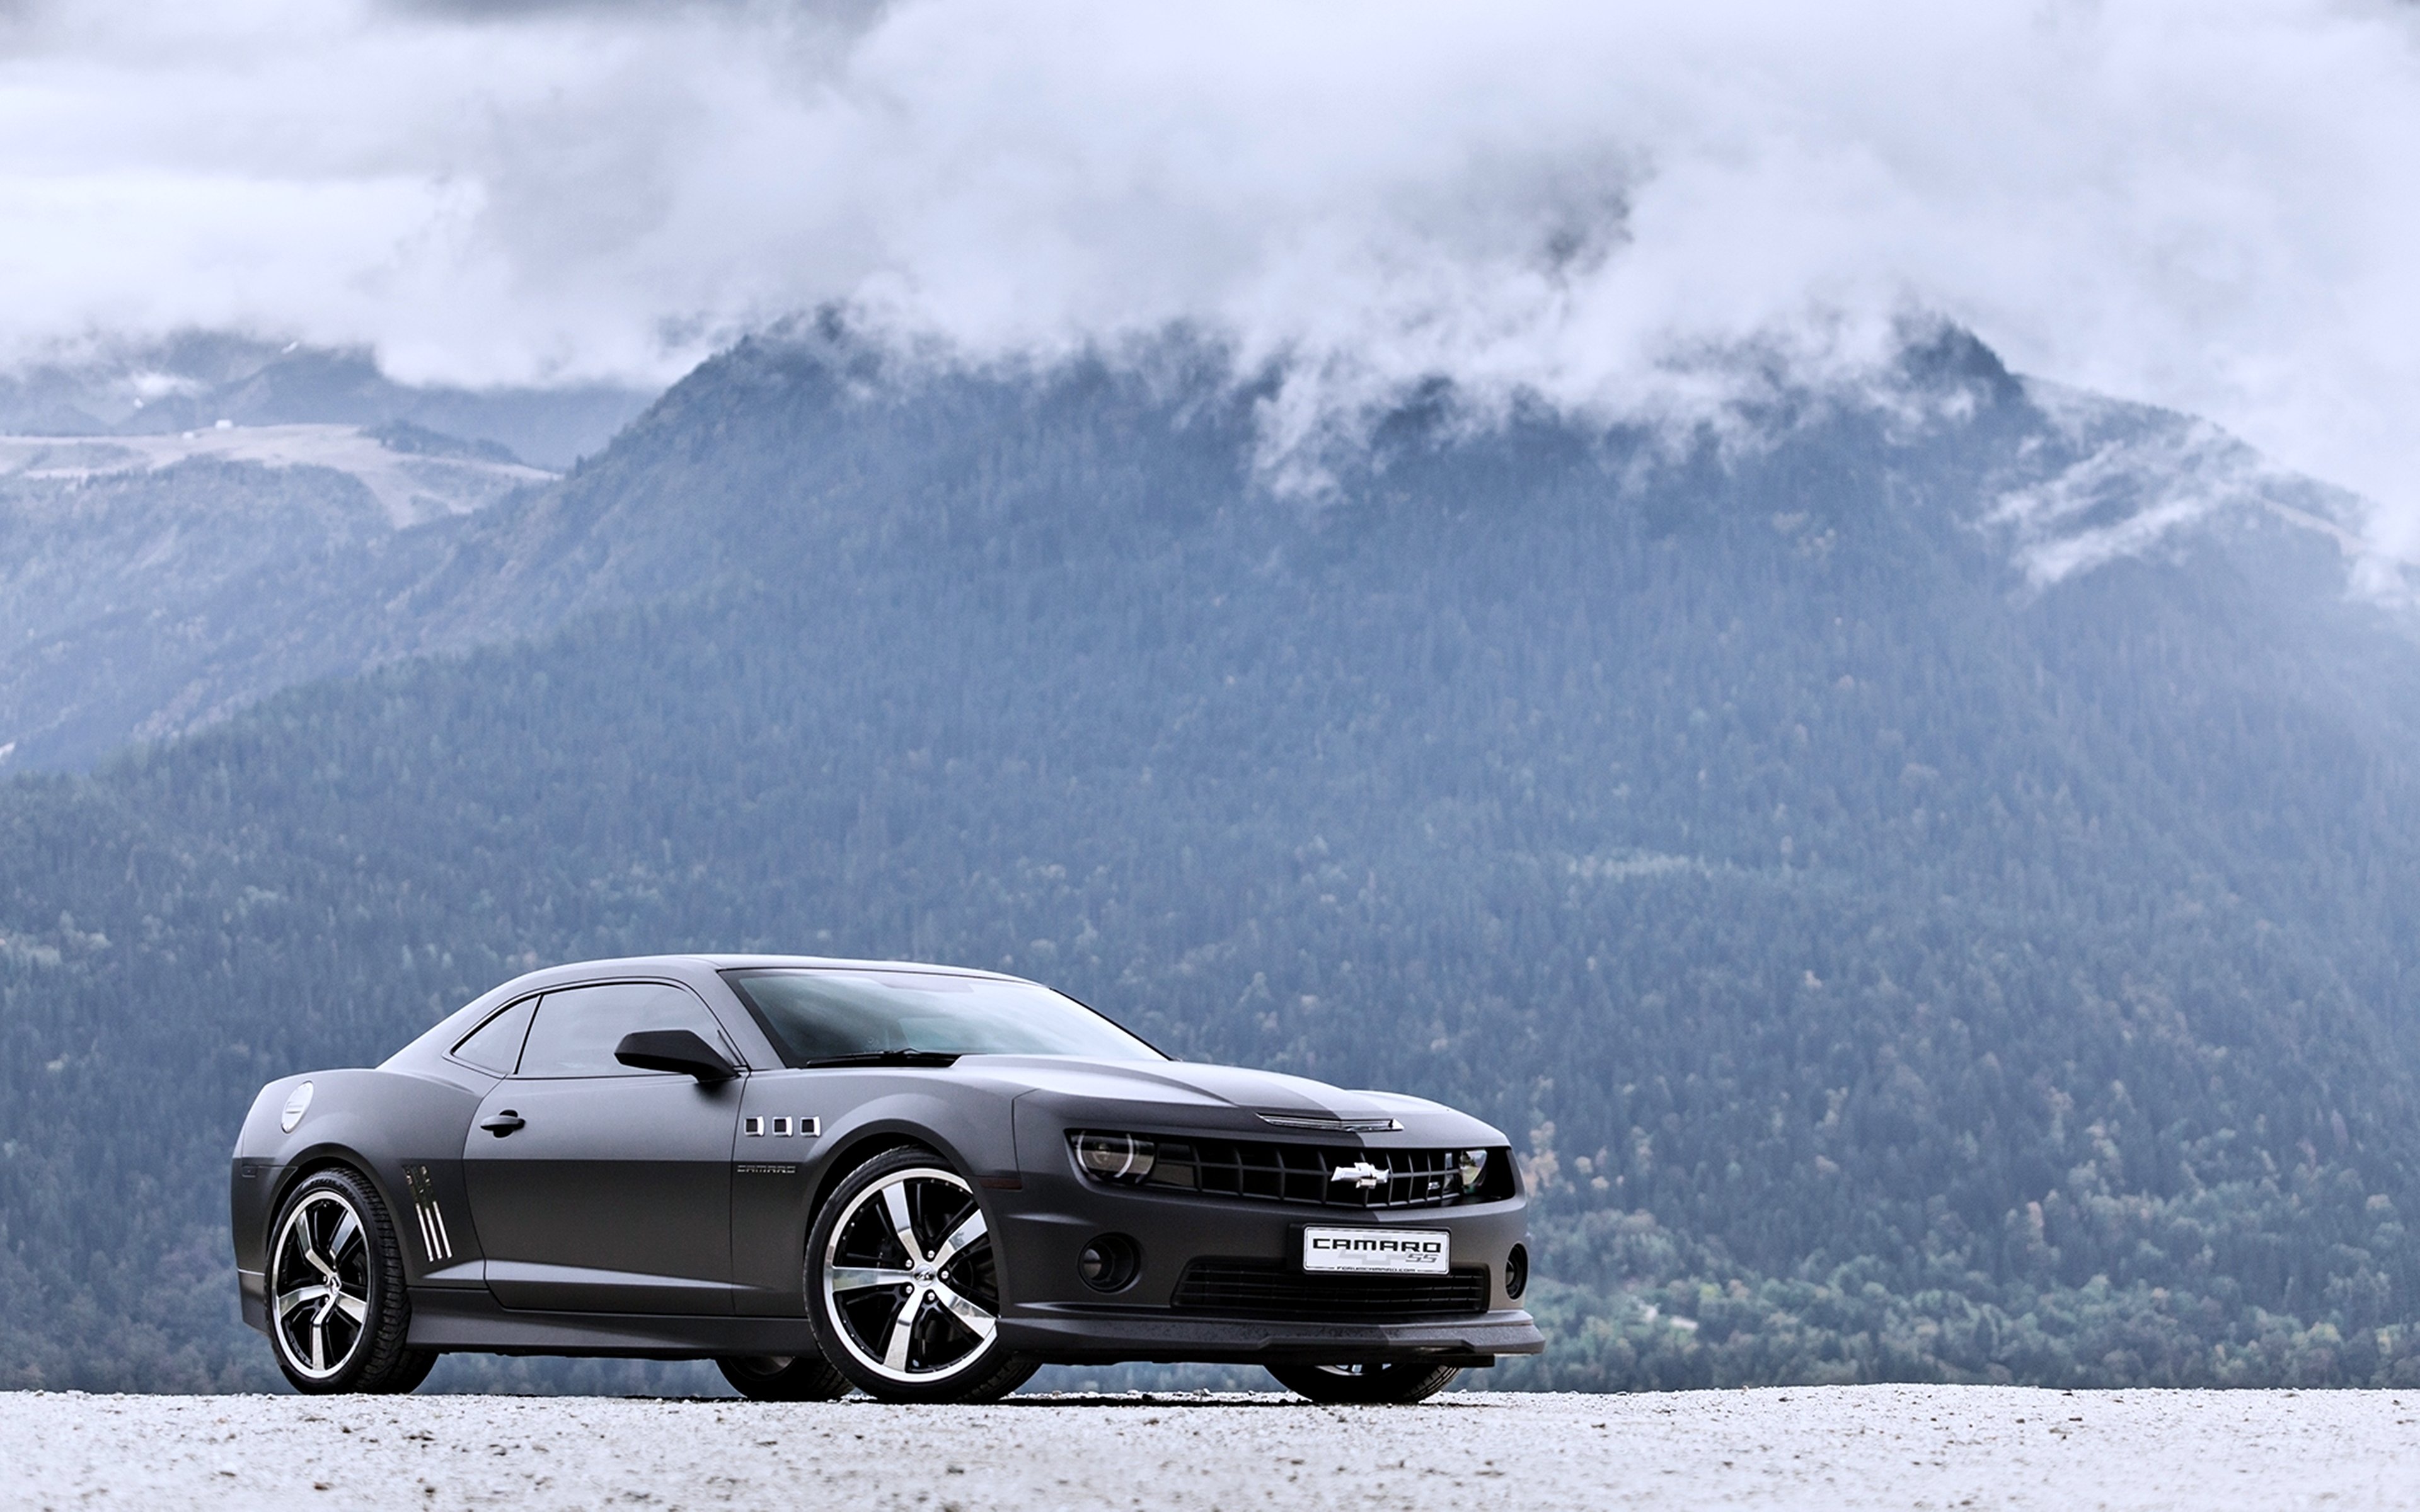 cars, Black, Landscape, Mountains, Clouds, Speed, Motors, Supercars, Chevrole, Camaro, Ss Wallpaper